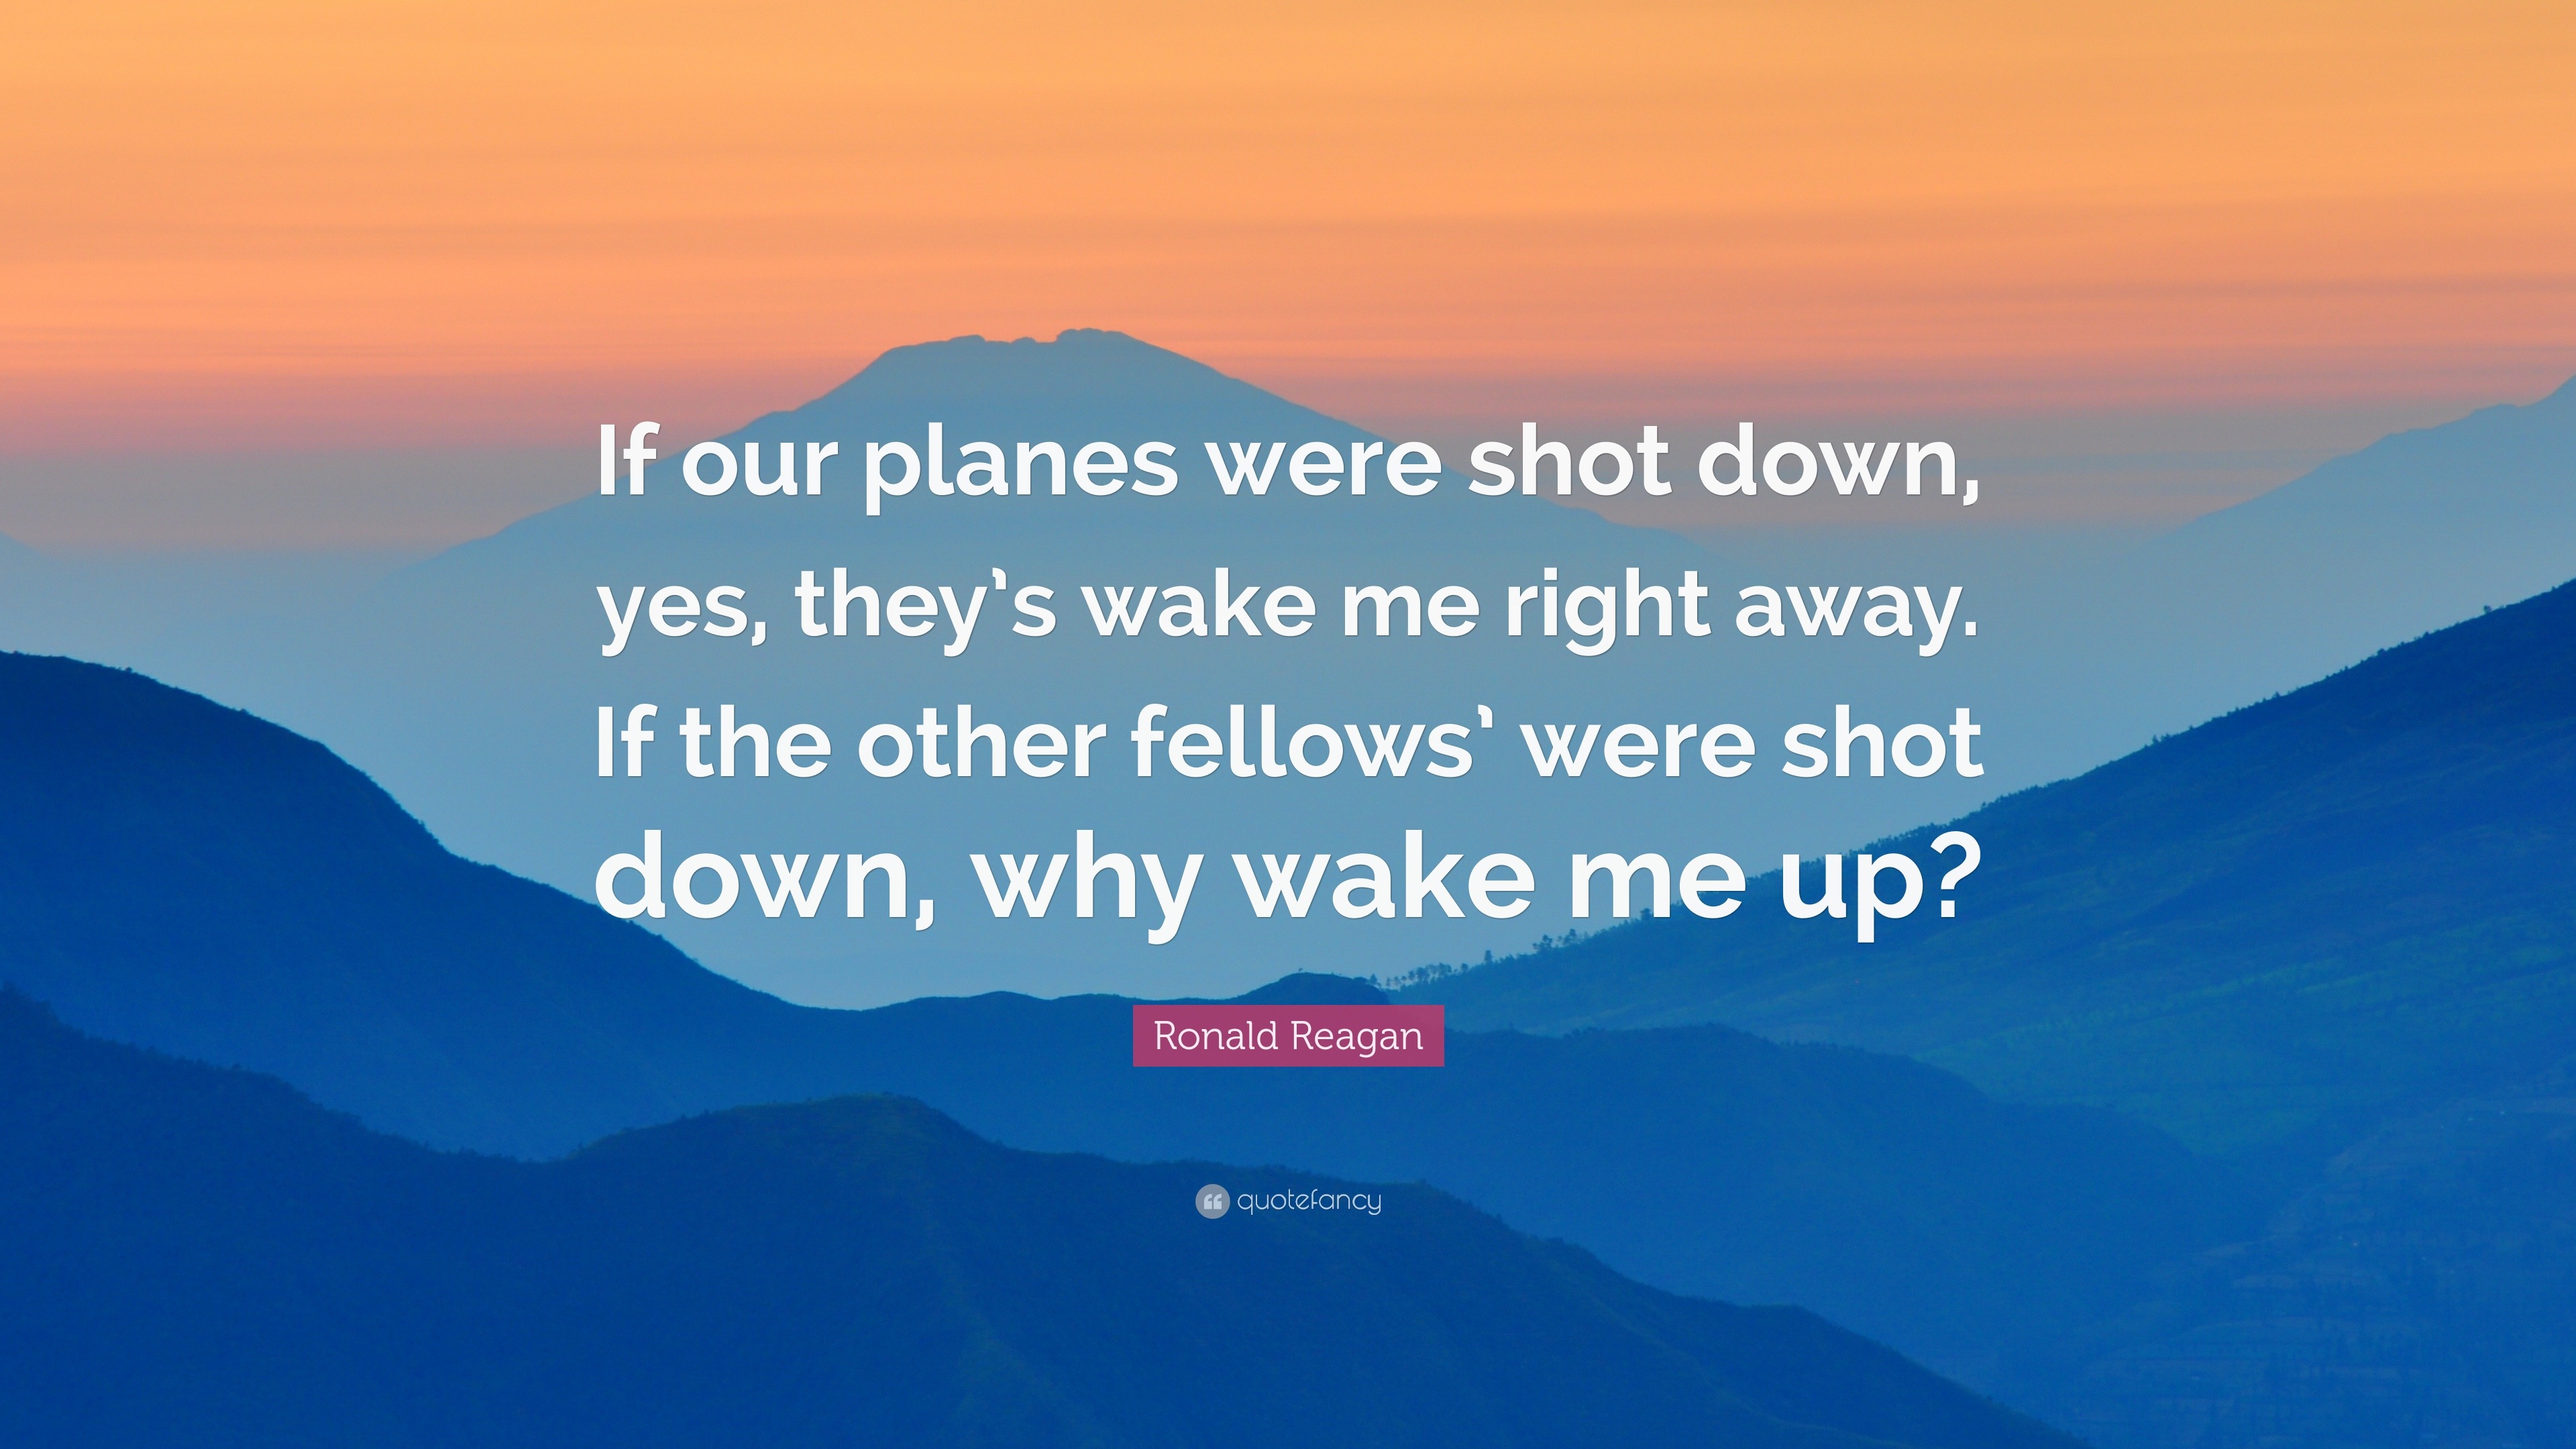 Ronald Reagan Quote “If our planes were shot down yes they s wake